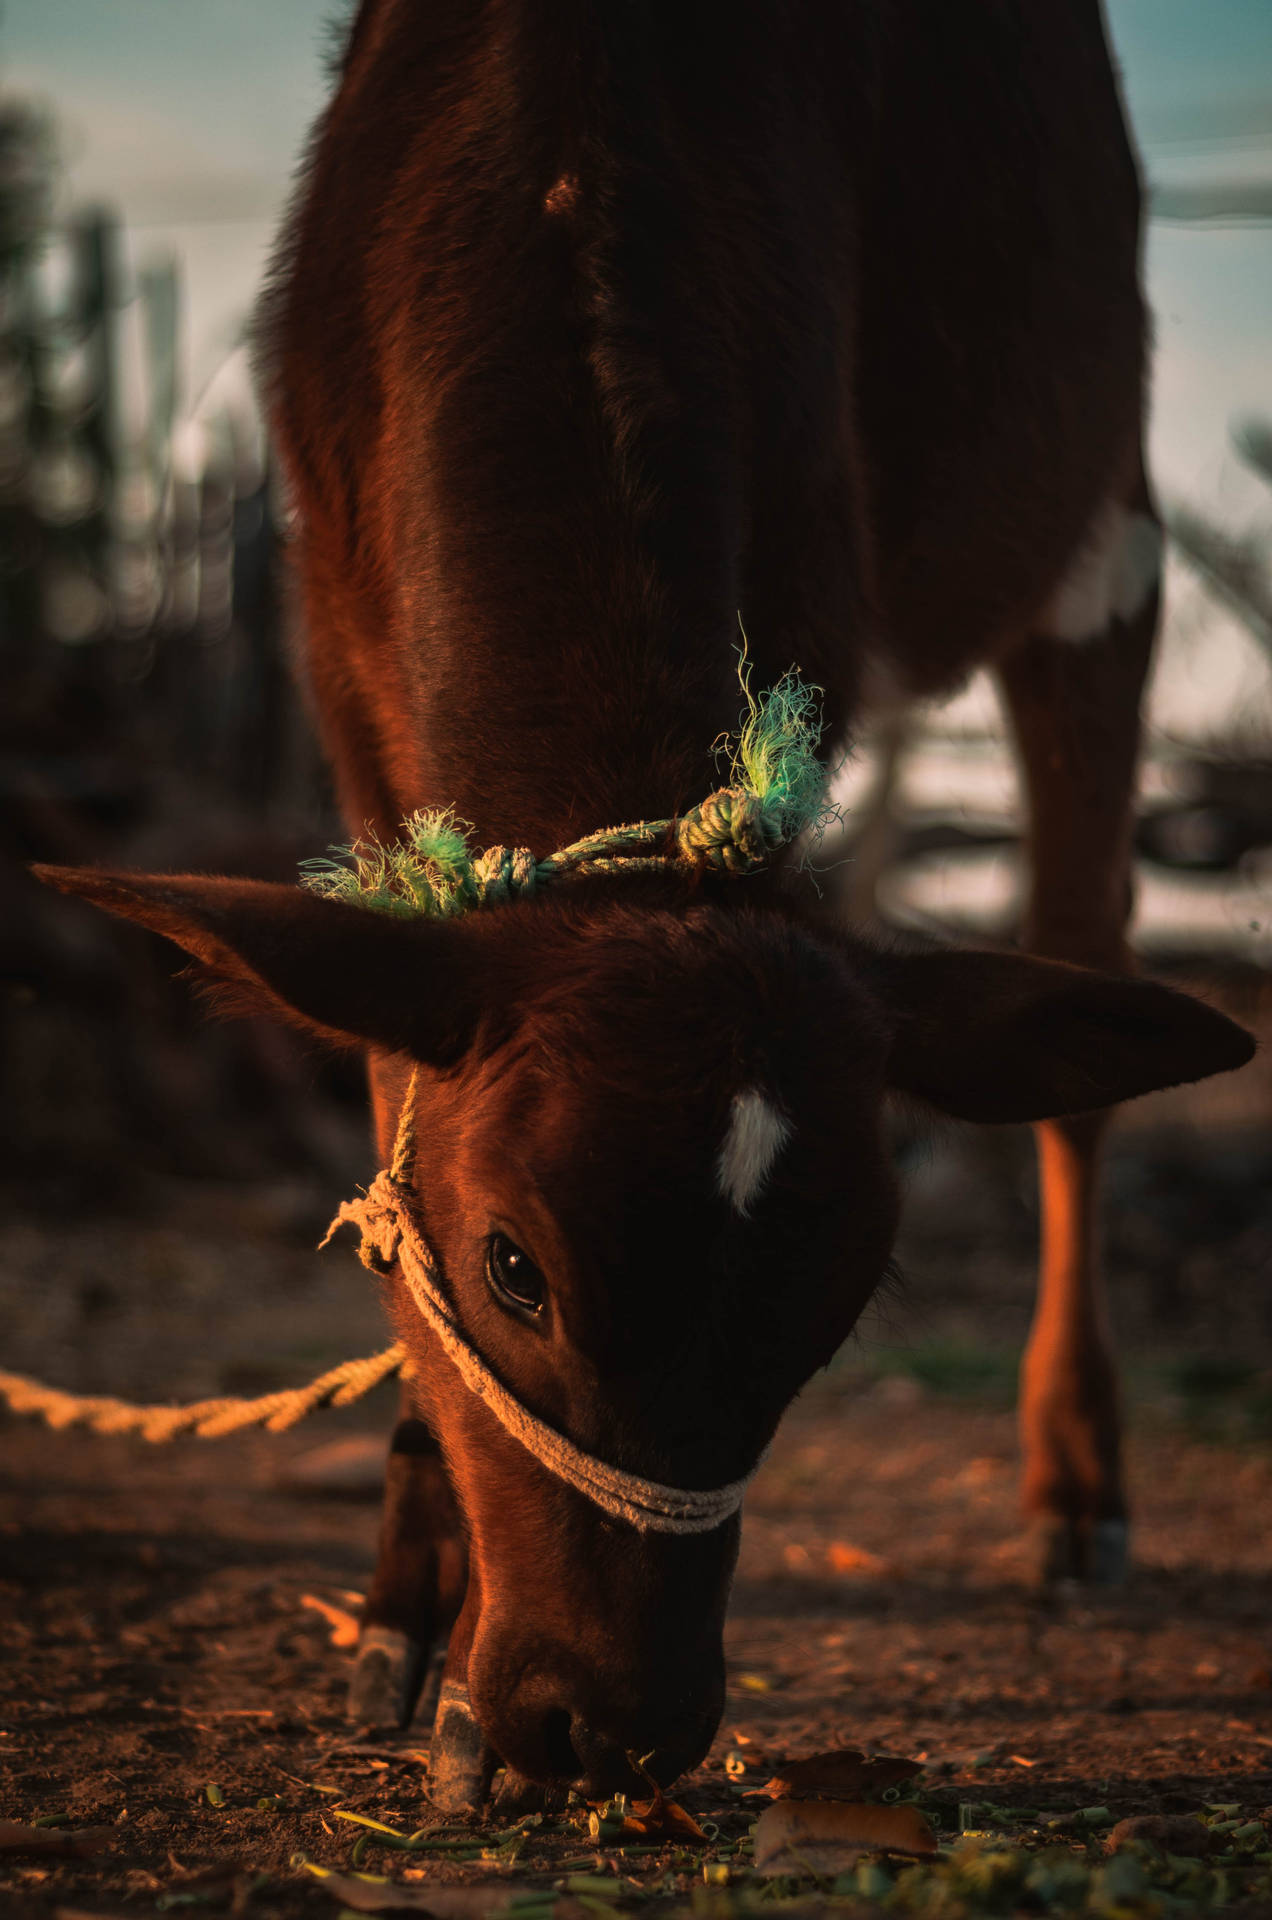 Cute Cow With Rope In Mouth Background